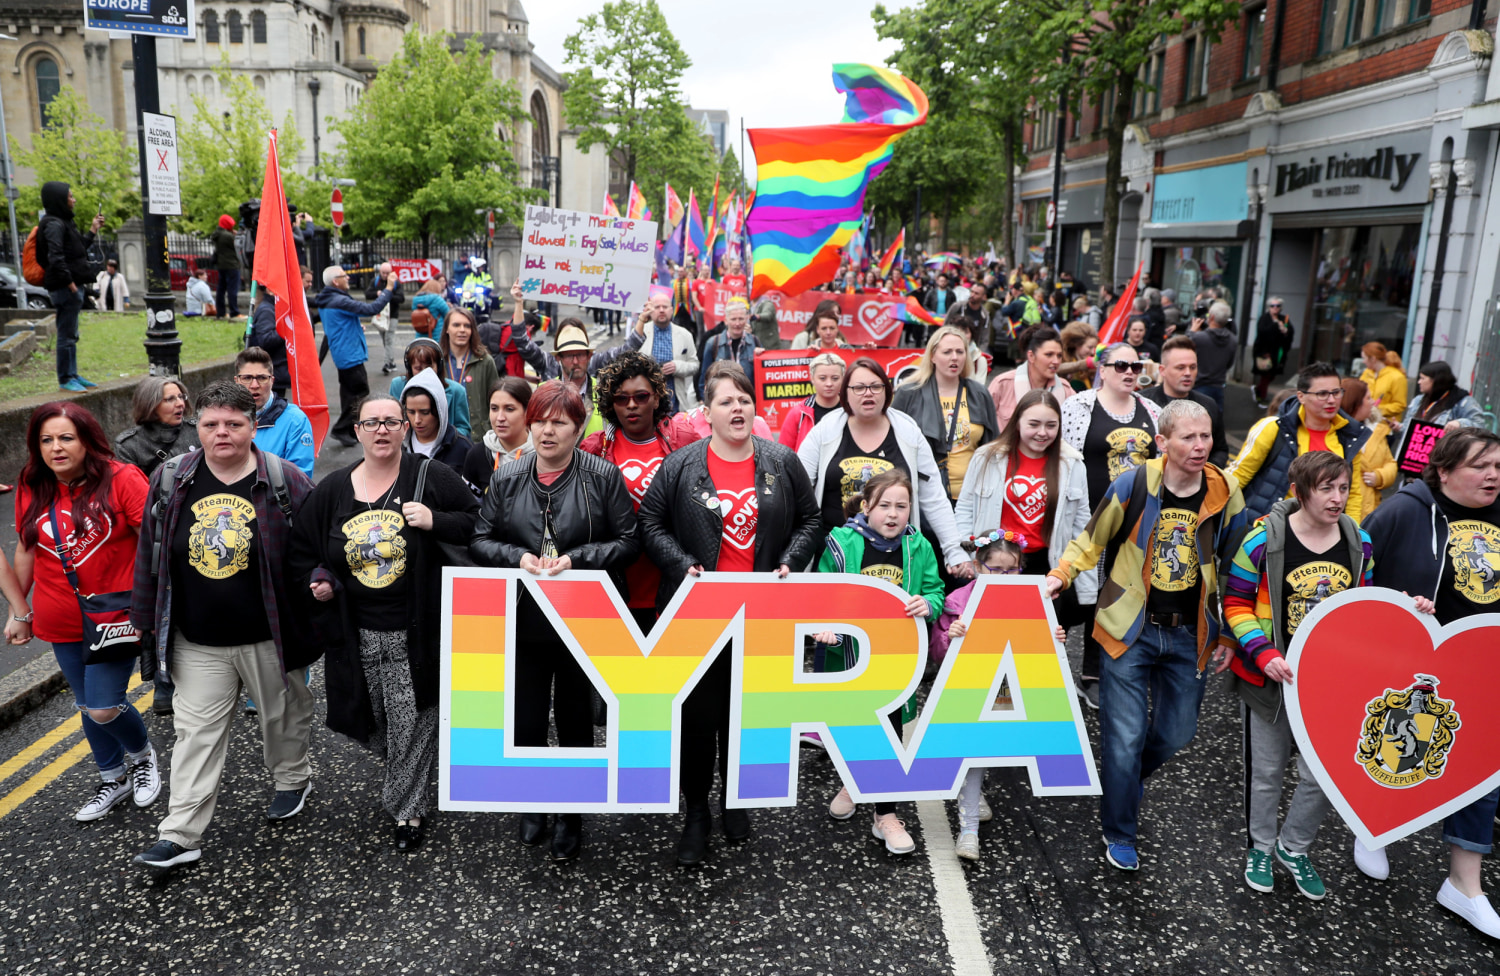 Ireland polls ninth as the world's most gay-friendly nation